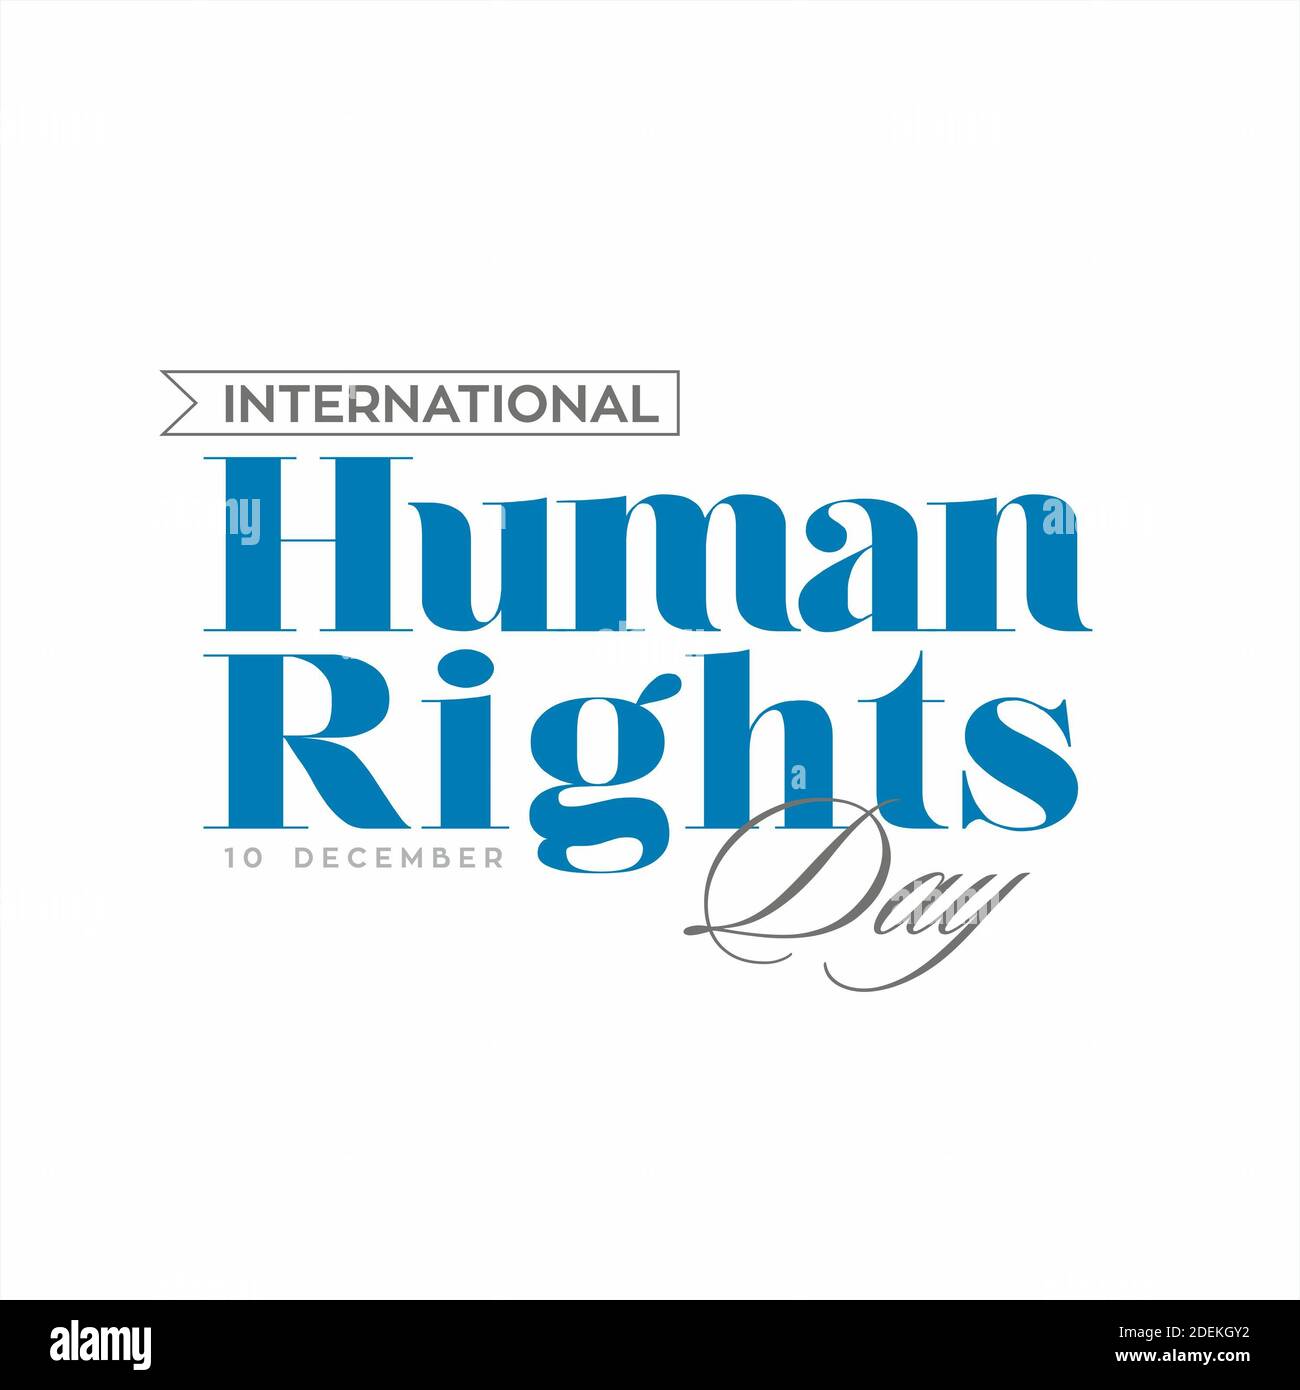 International Human Rights Day Typography With Raised Fist - Illustration Stock Photo